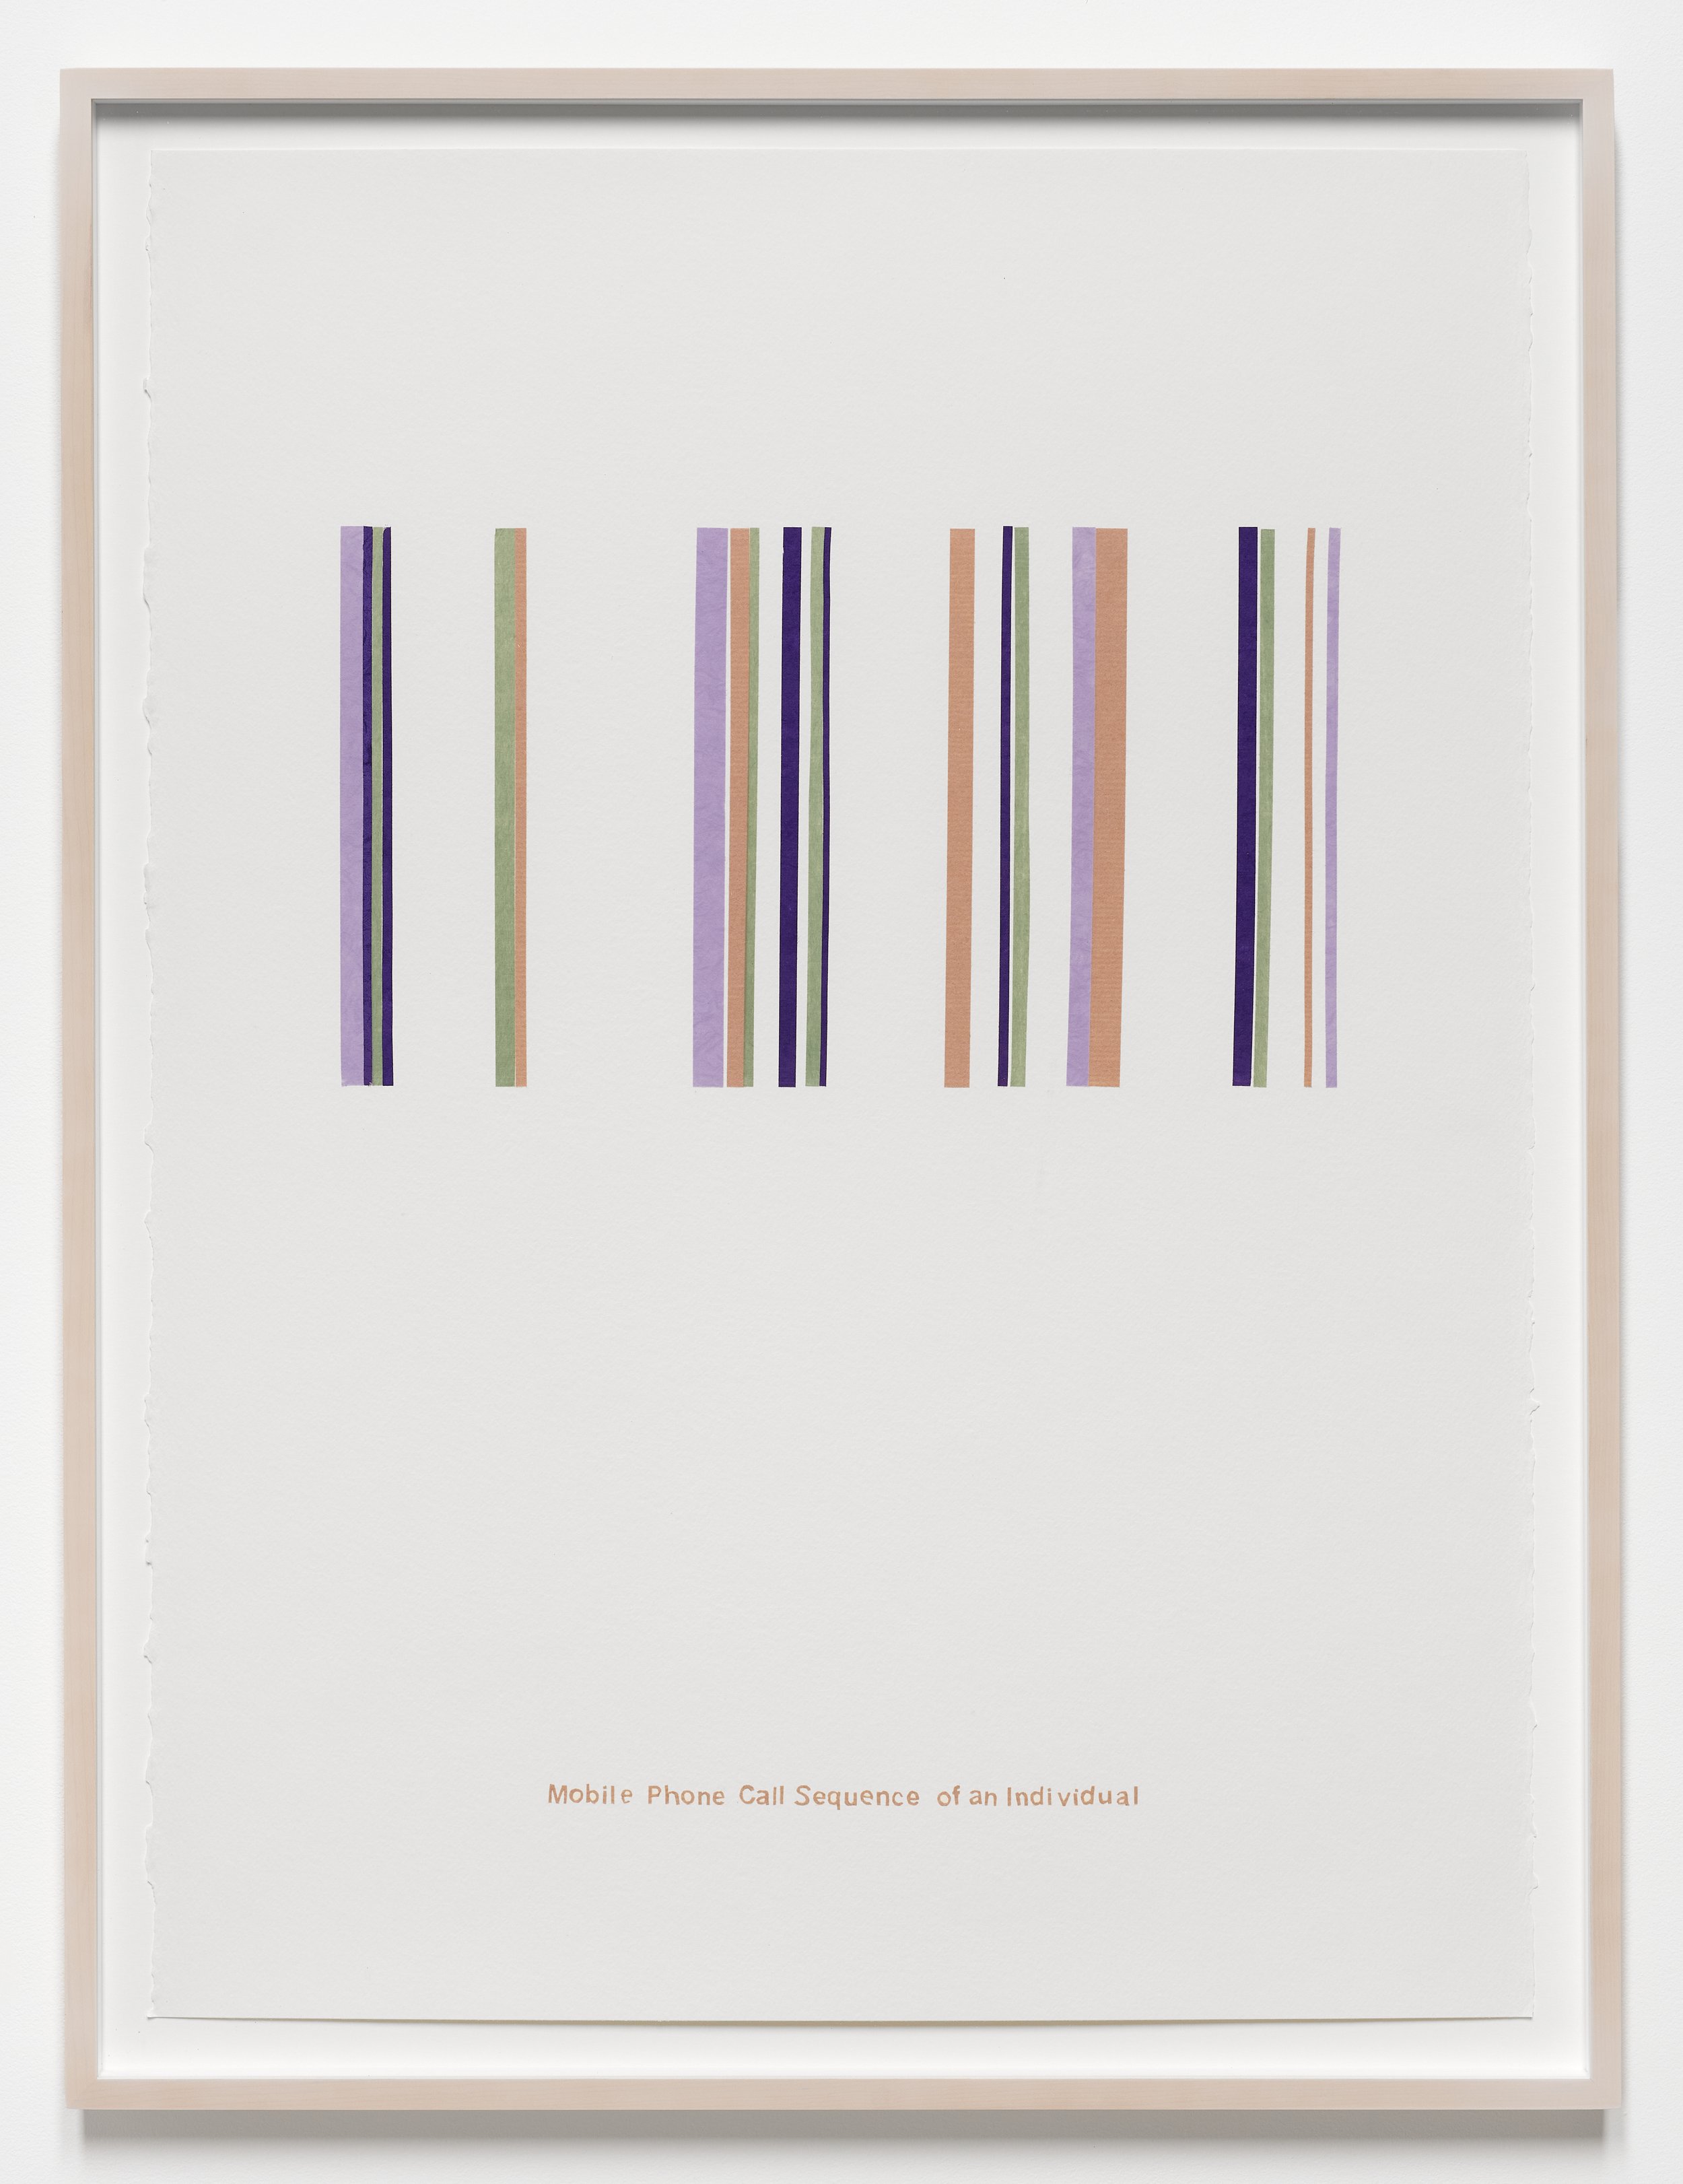   Richard Ibghy &amp; Marilou Lemmens,   Mobile Phone Call Sequence of an Individual , 2022. Colored paper, glue, ink on paper, 32.75 x 24.75 in (Framed). 